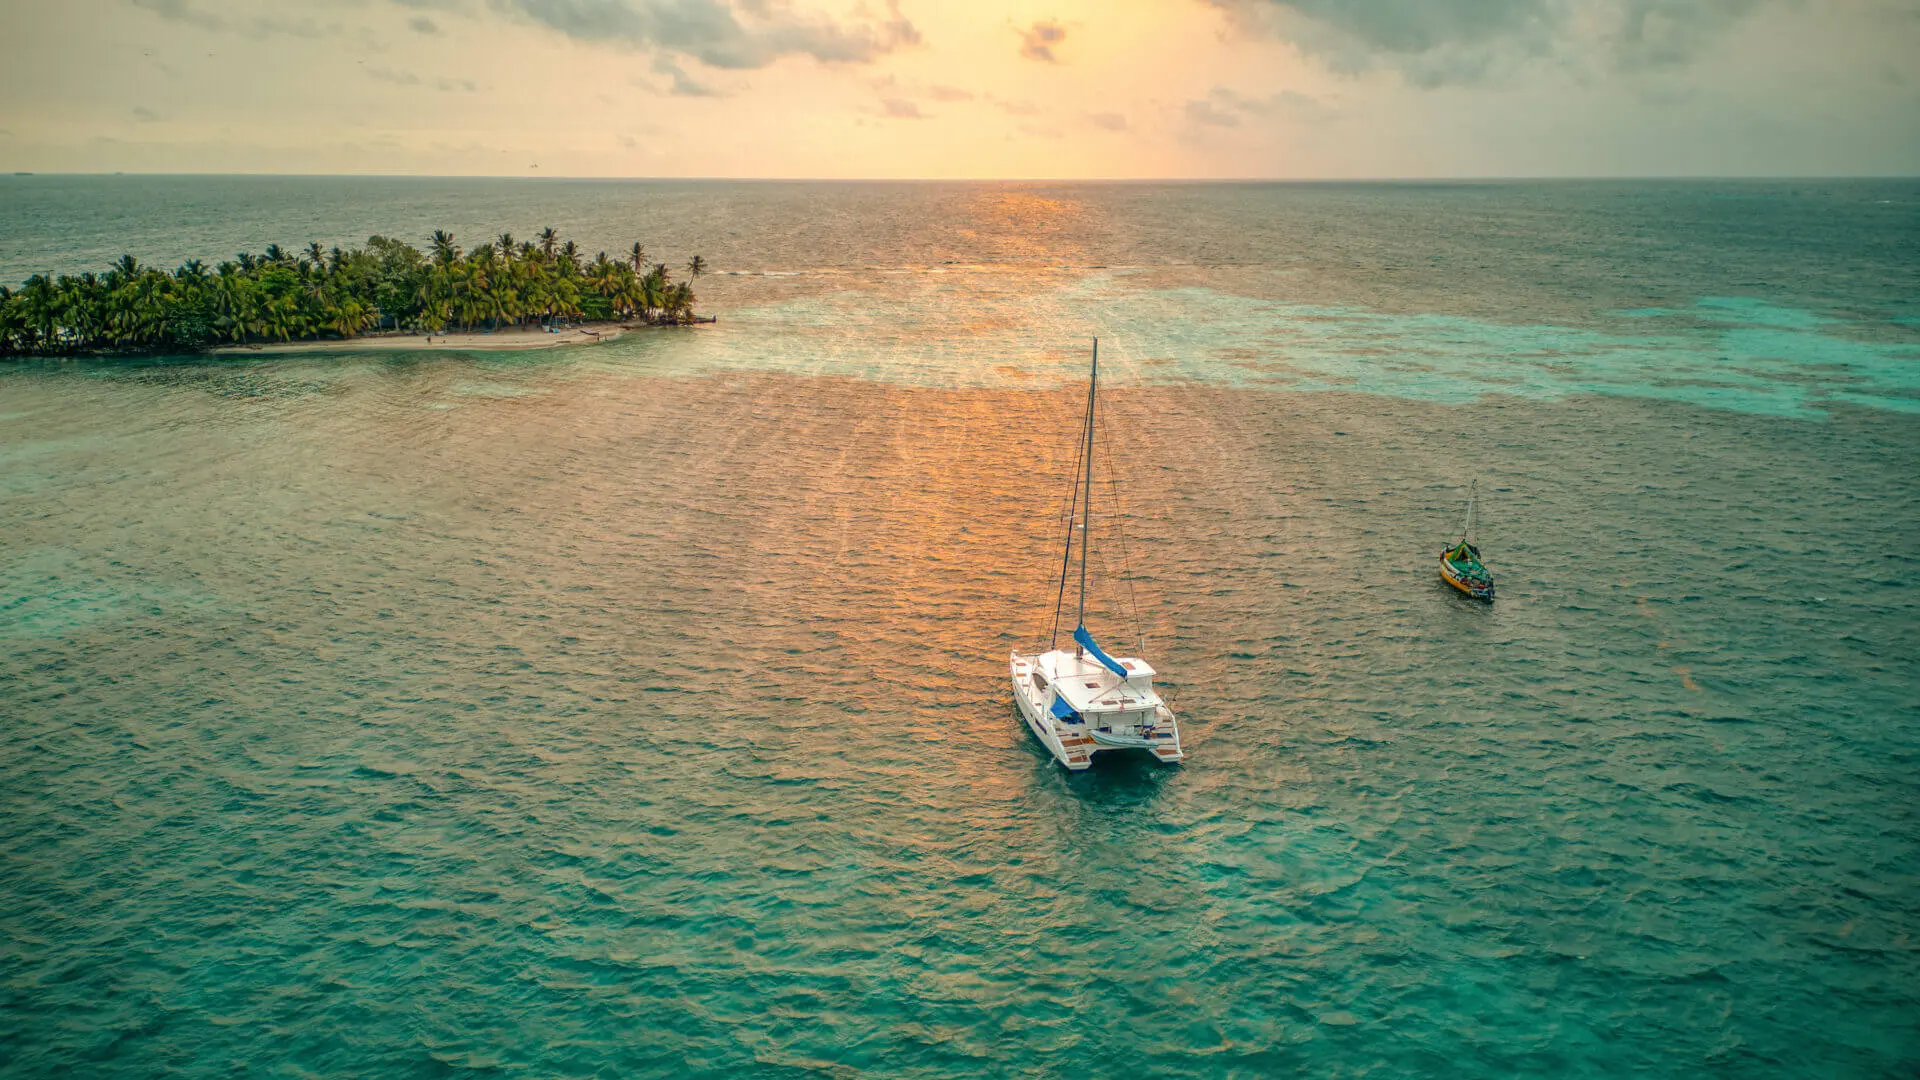 An aerial view of a sailboat in the ocean near an island on a vacation.